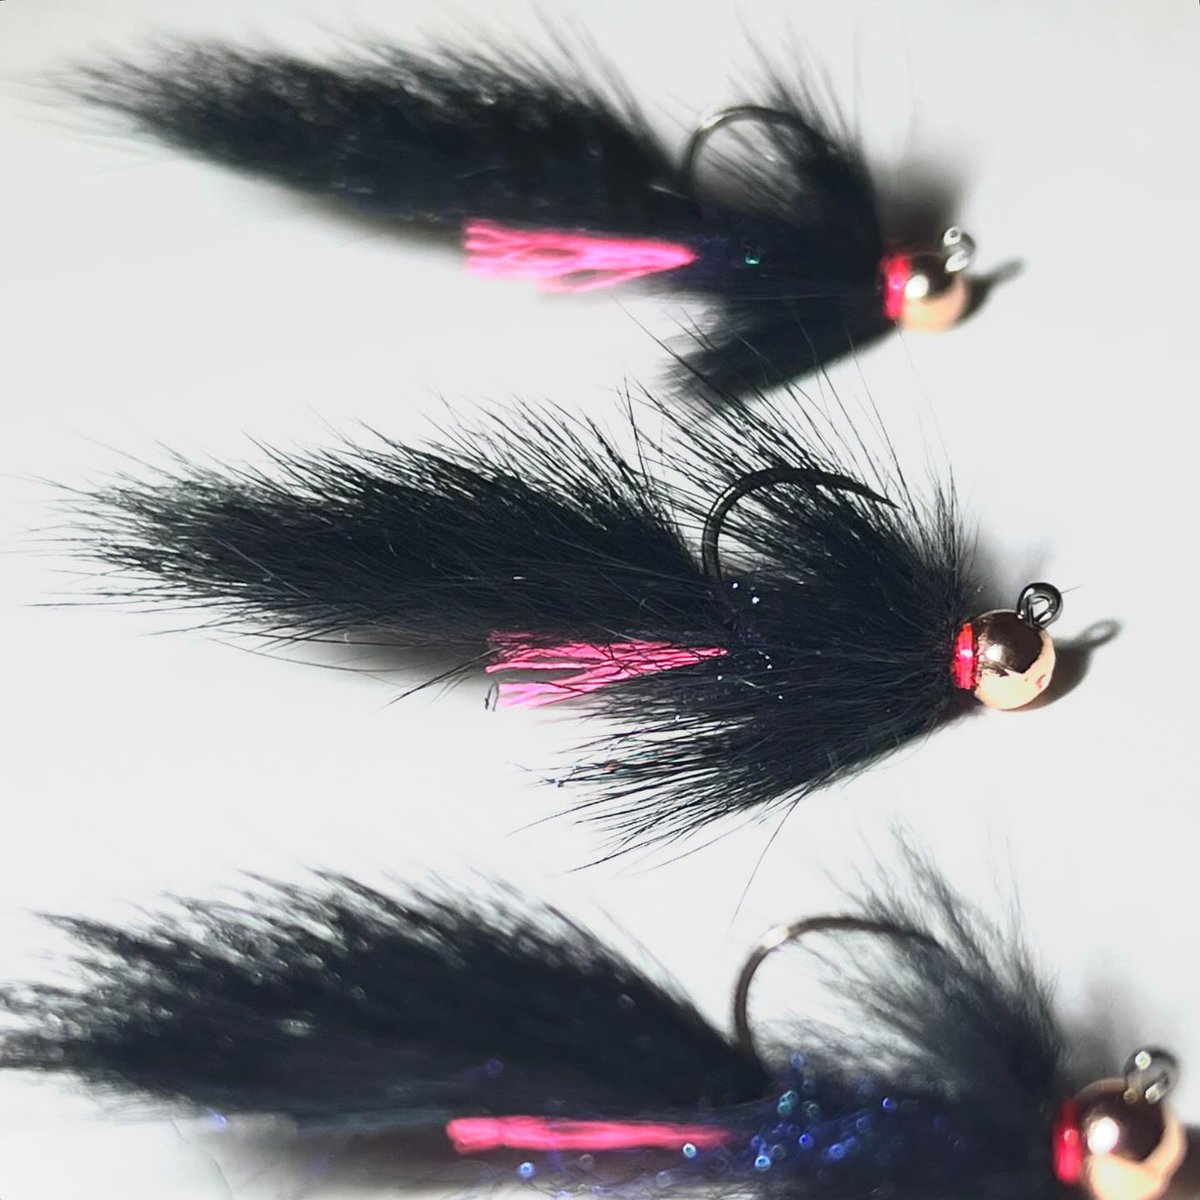 'This fly is a favorite of mine in high water.' // tie and image by Sean Witman @sean_witman . . . . #flytying #flytyingjunkie #flyfishing #flyfishingaddict #flyfish #flytyingnation #jstockard #fishing #atthevise #flytyingaddict #flytyingporn